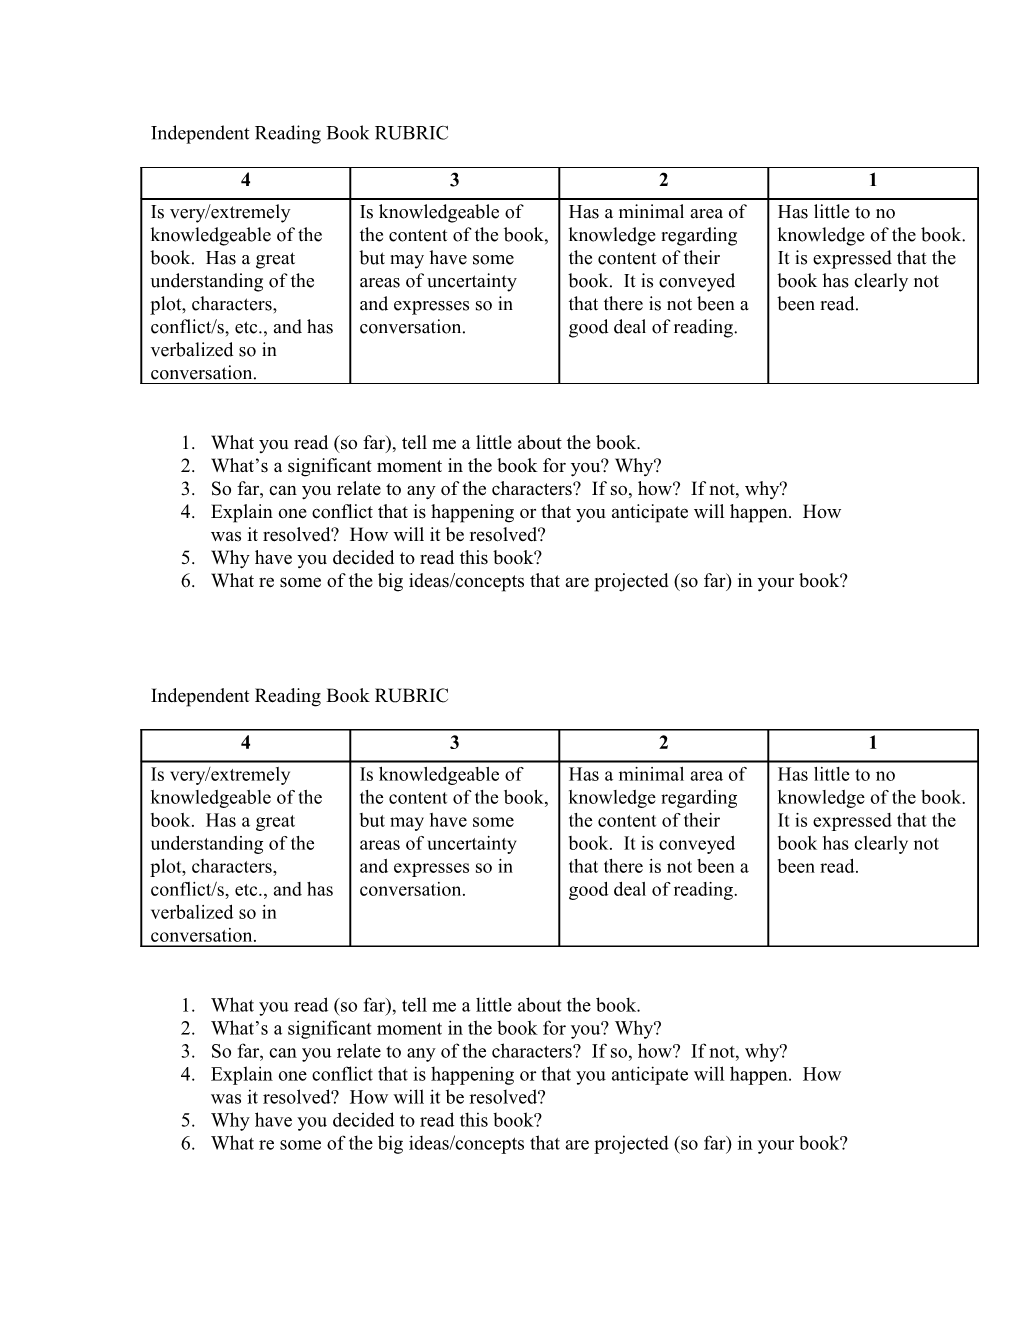 Independent Reading Book RUBRIC